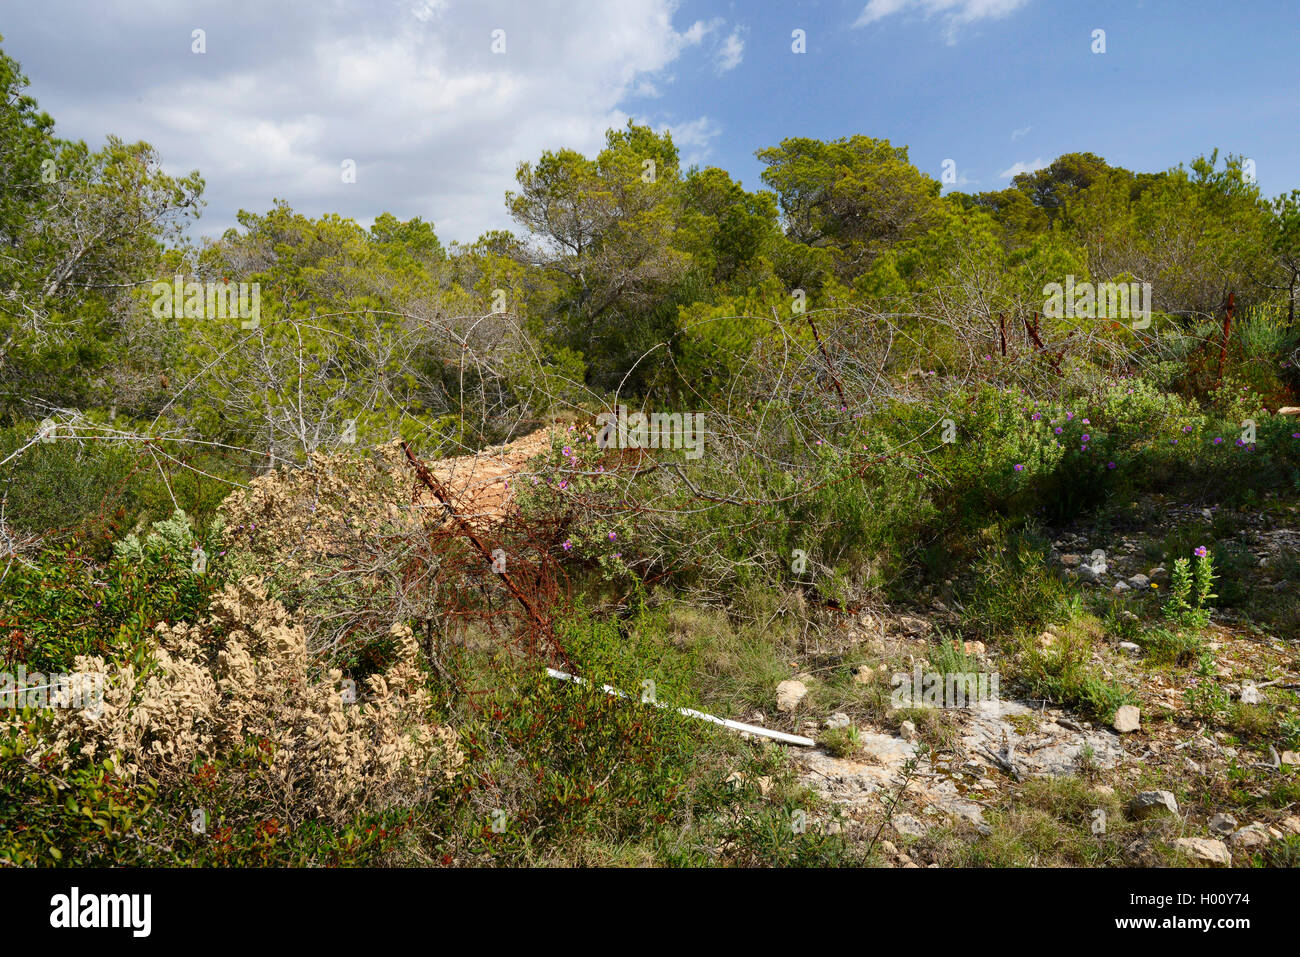 parade ground barricaded with barbed wire, Spain, Balearen, Majorca, El Toro Stock Photo